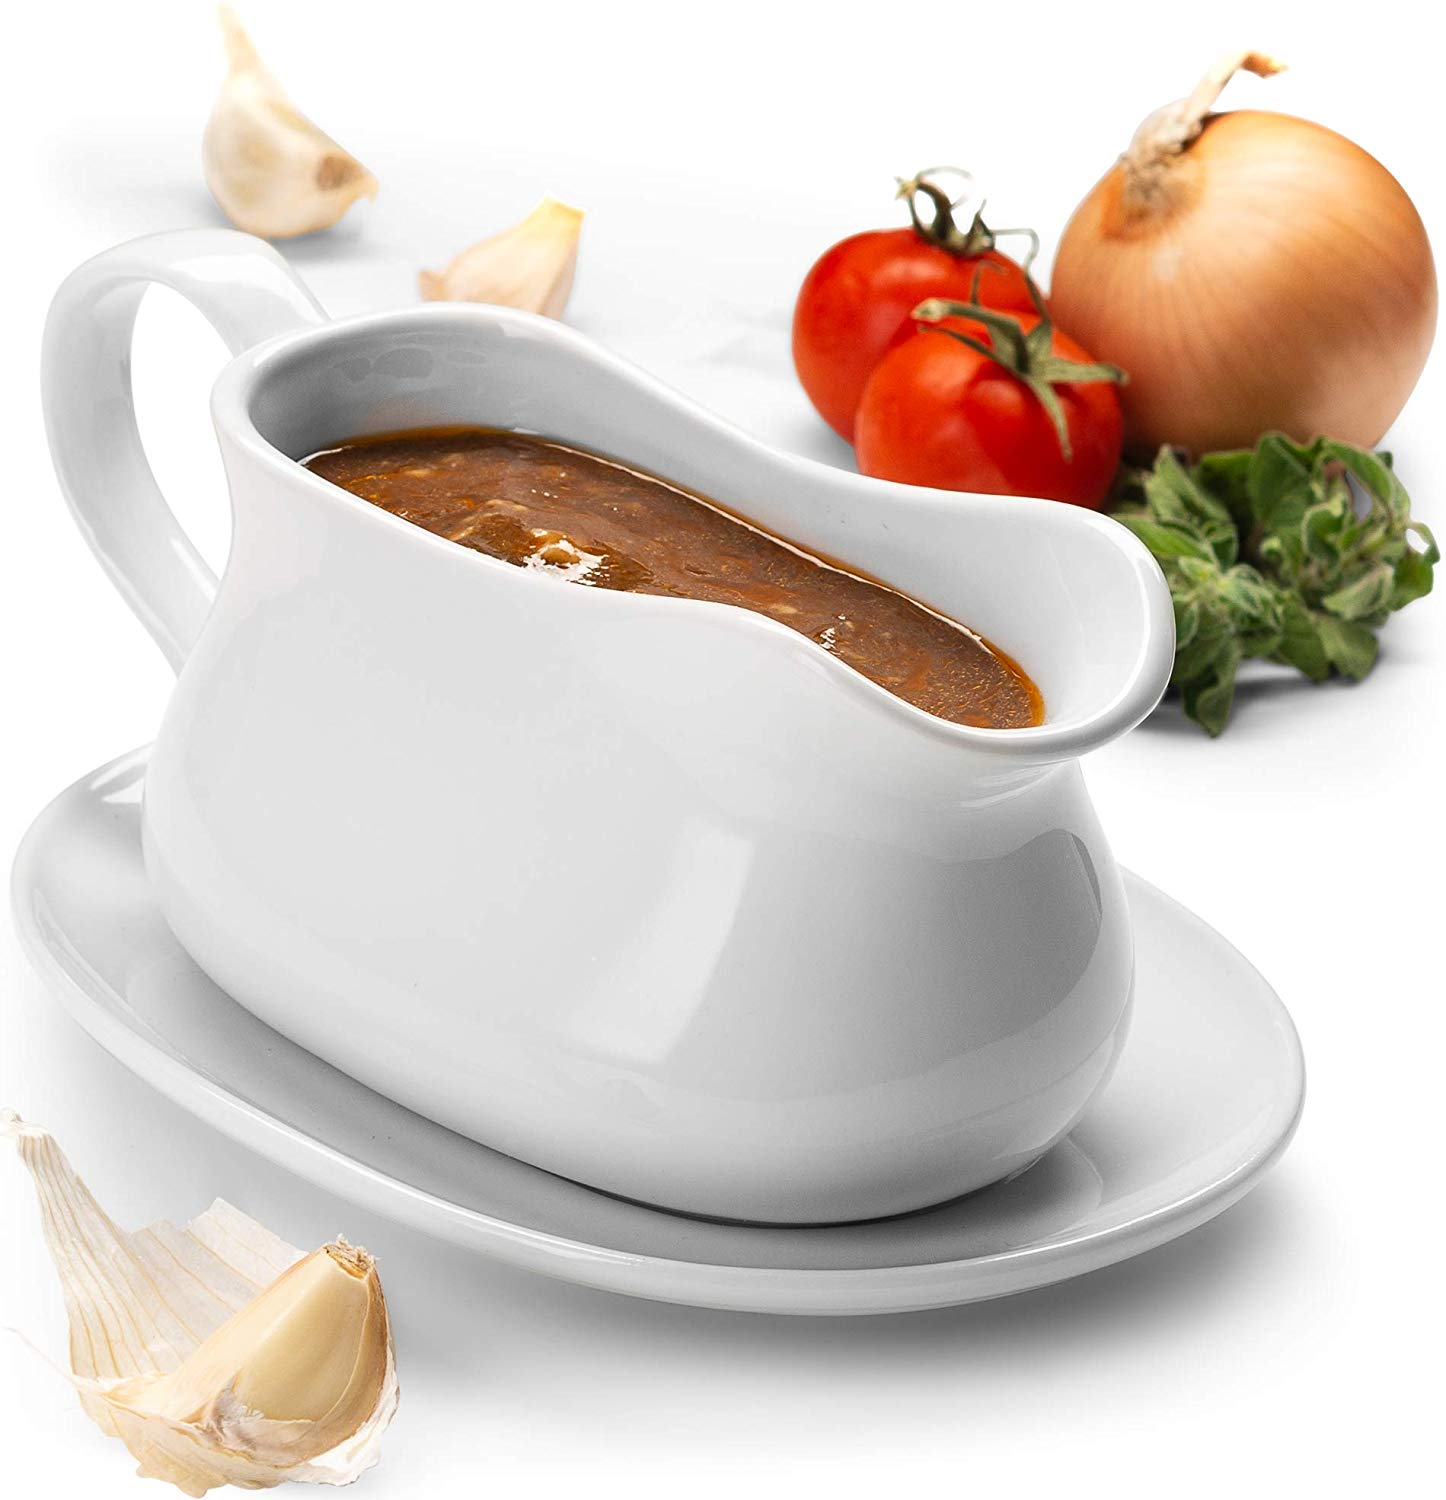 It's all gravy with the heated gravy boat - CNET